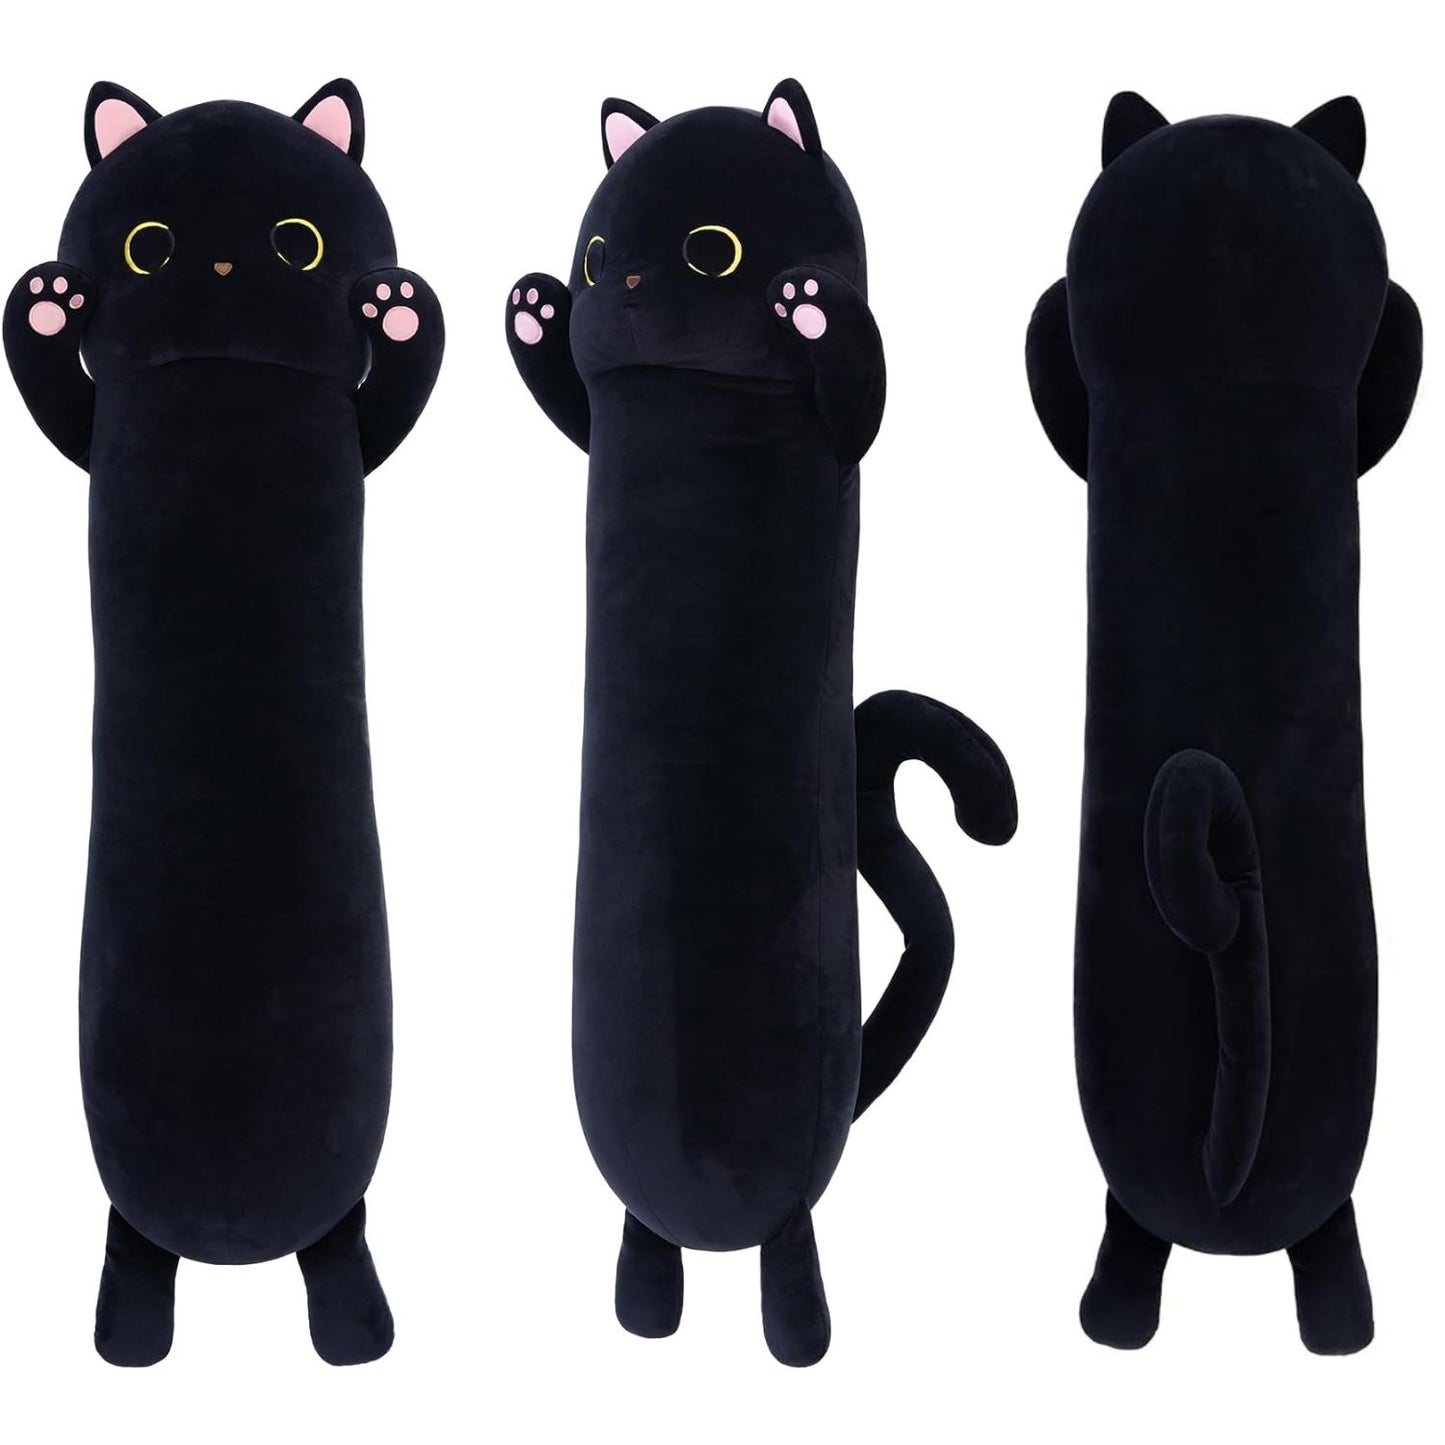 The black cat stuffed toy is simply precious with its cute face, pink ears, and paws. Not to mention the playful tail on its back - too adorable! Its long, soft body makes it perfect for snuggling up with. This toy is definitely a great gift for any festive or special occasion! 